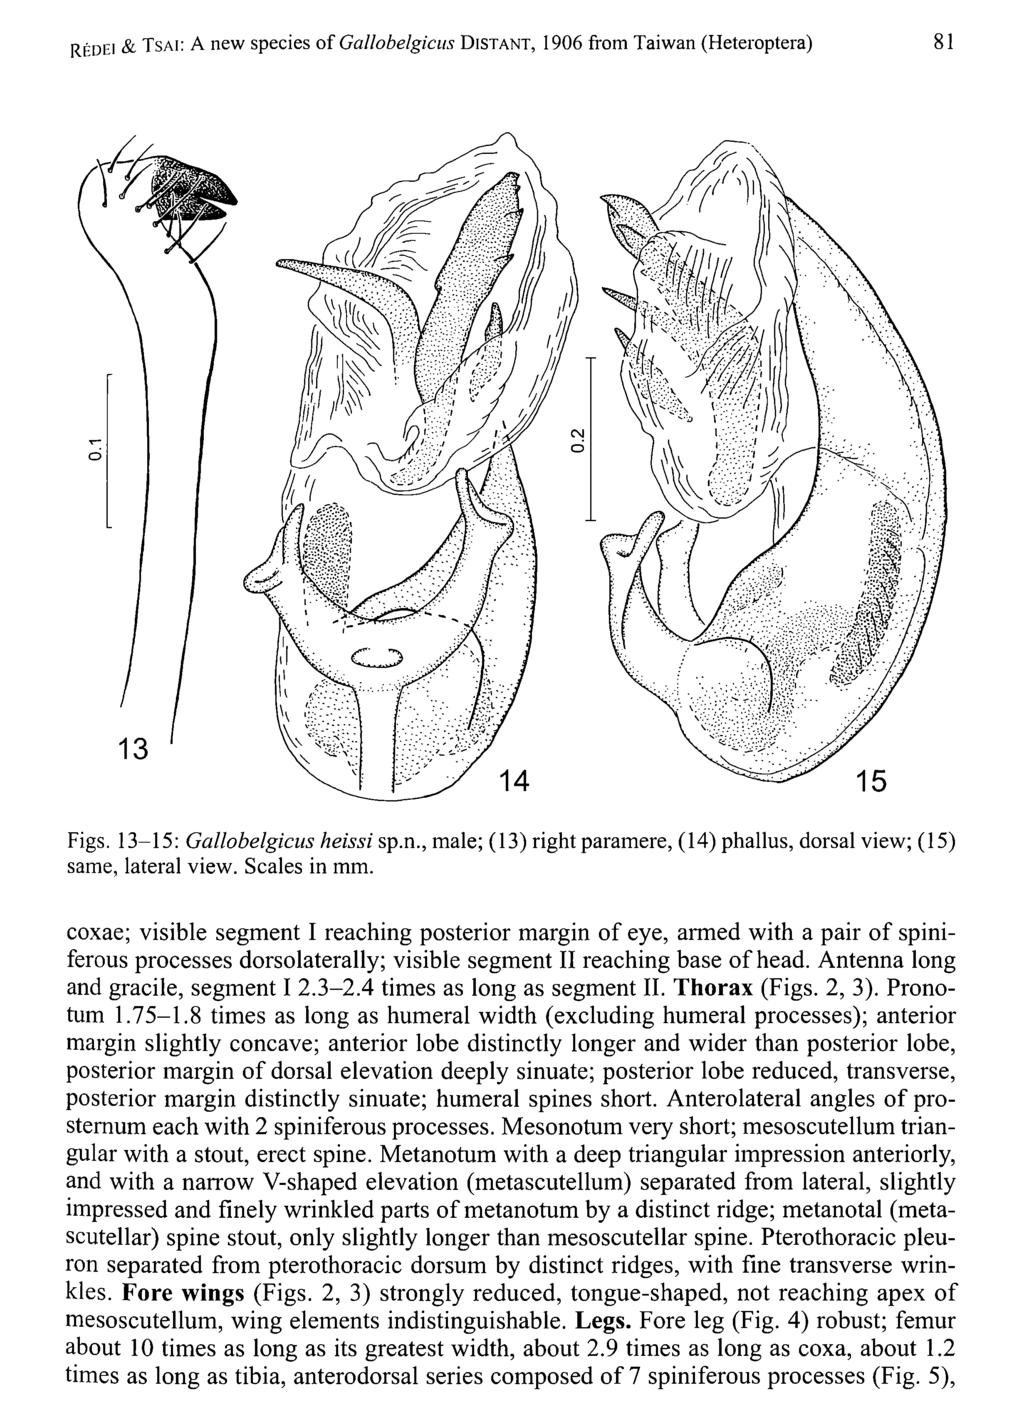 Redei & T sa i: A new species of Gallobelgicus D i s t a n t, 1906 from Taiwan (Heteroptera) 81 Figs. 13-15: Gallobelgicus heissi sp.n., male; (13) right paramere, (14) phallus, dorsal view; (15) same, lateral view.